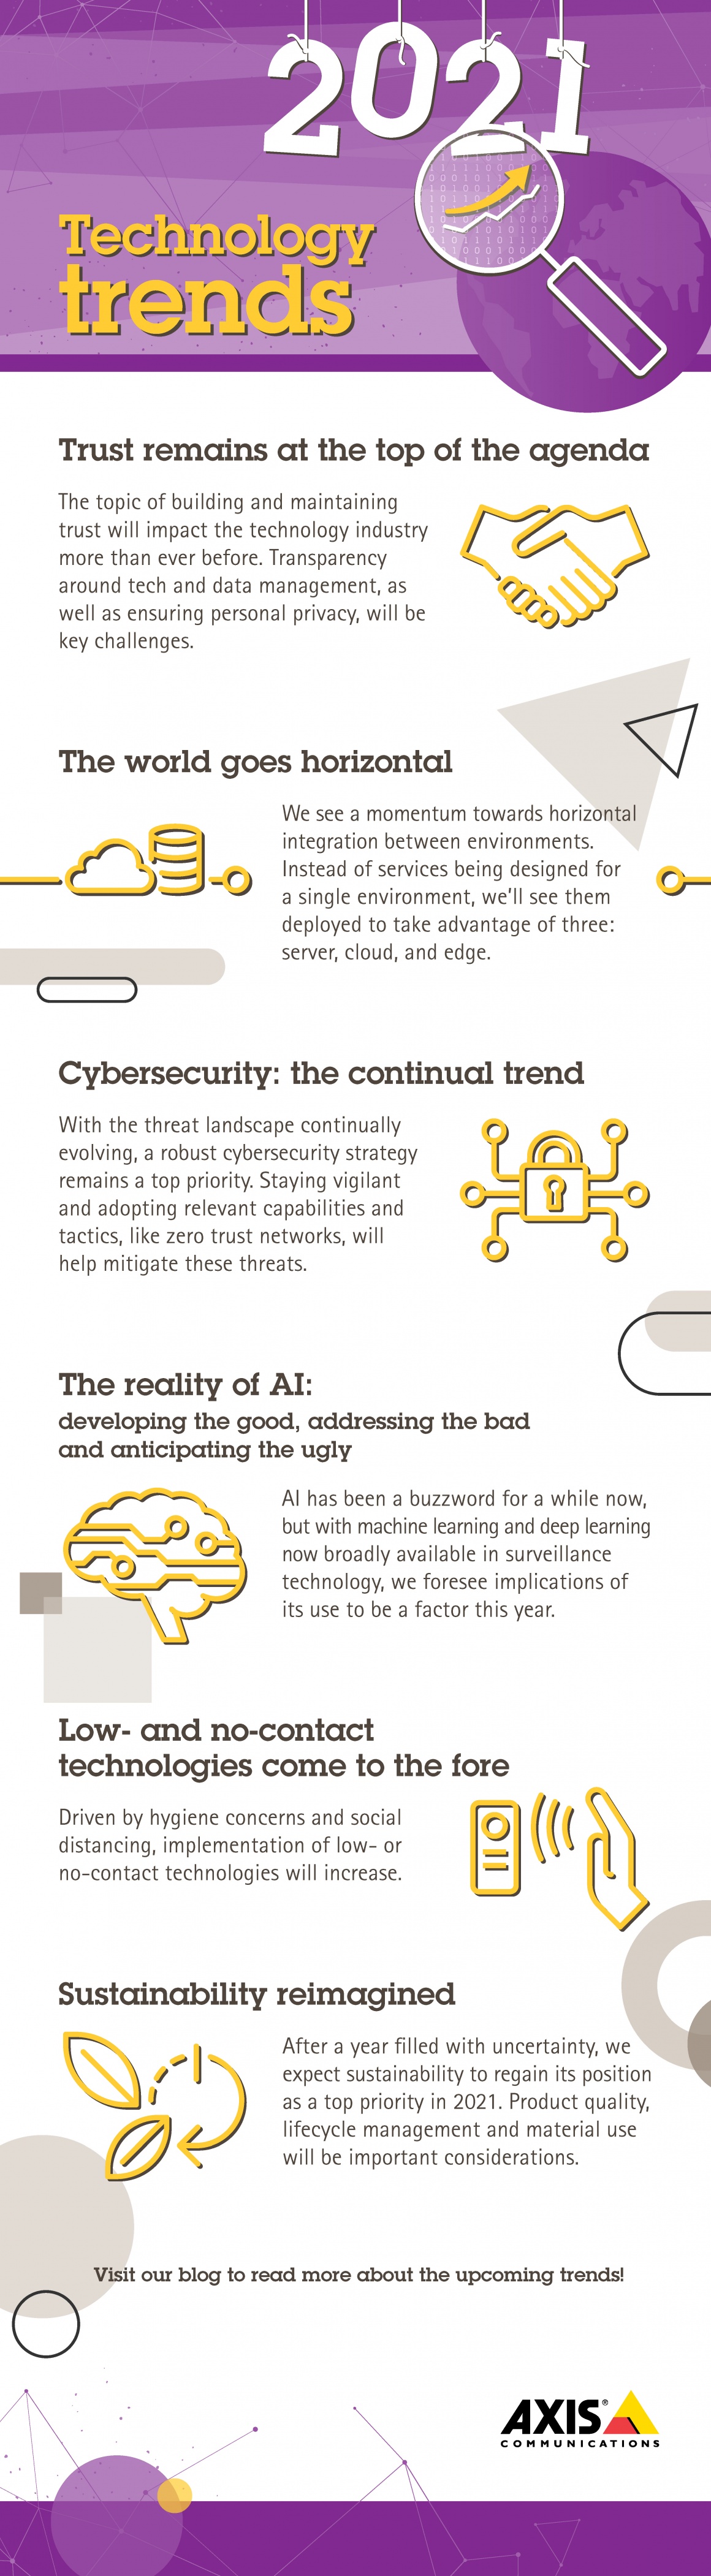 Technology trends infographic